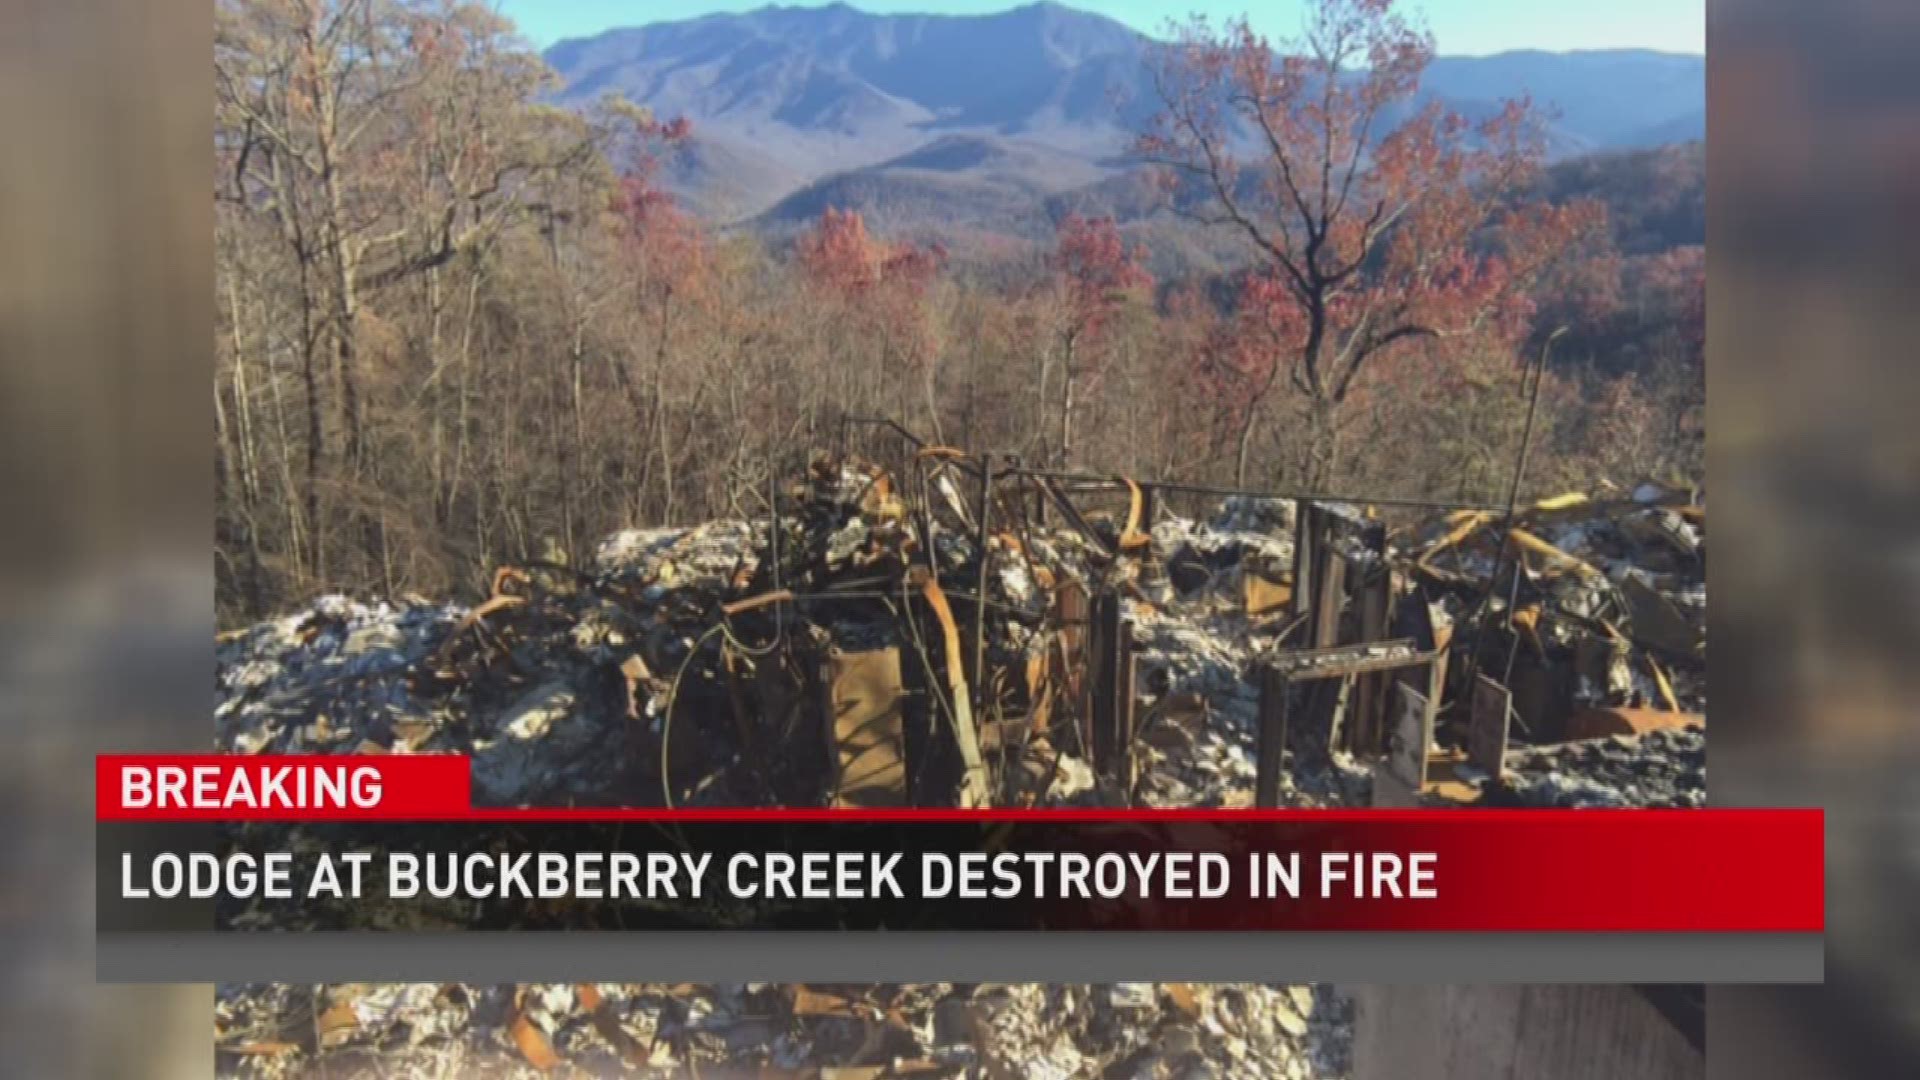 Dec. 1, 2016: The owners of The Lodge at Buckberry Creek have learned that the lodge was destroyed in the Sevier County fires.